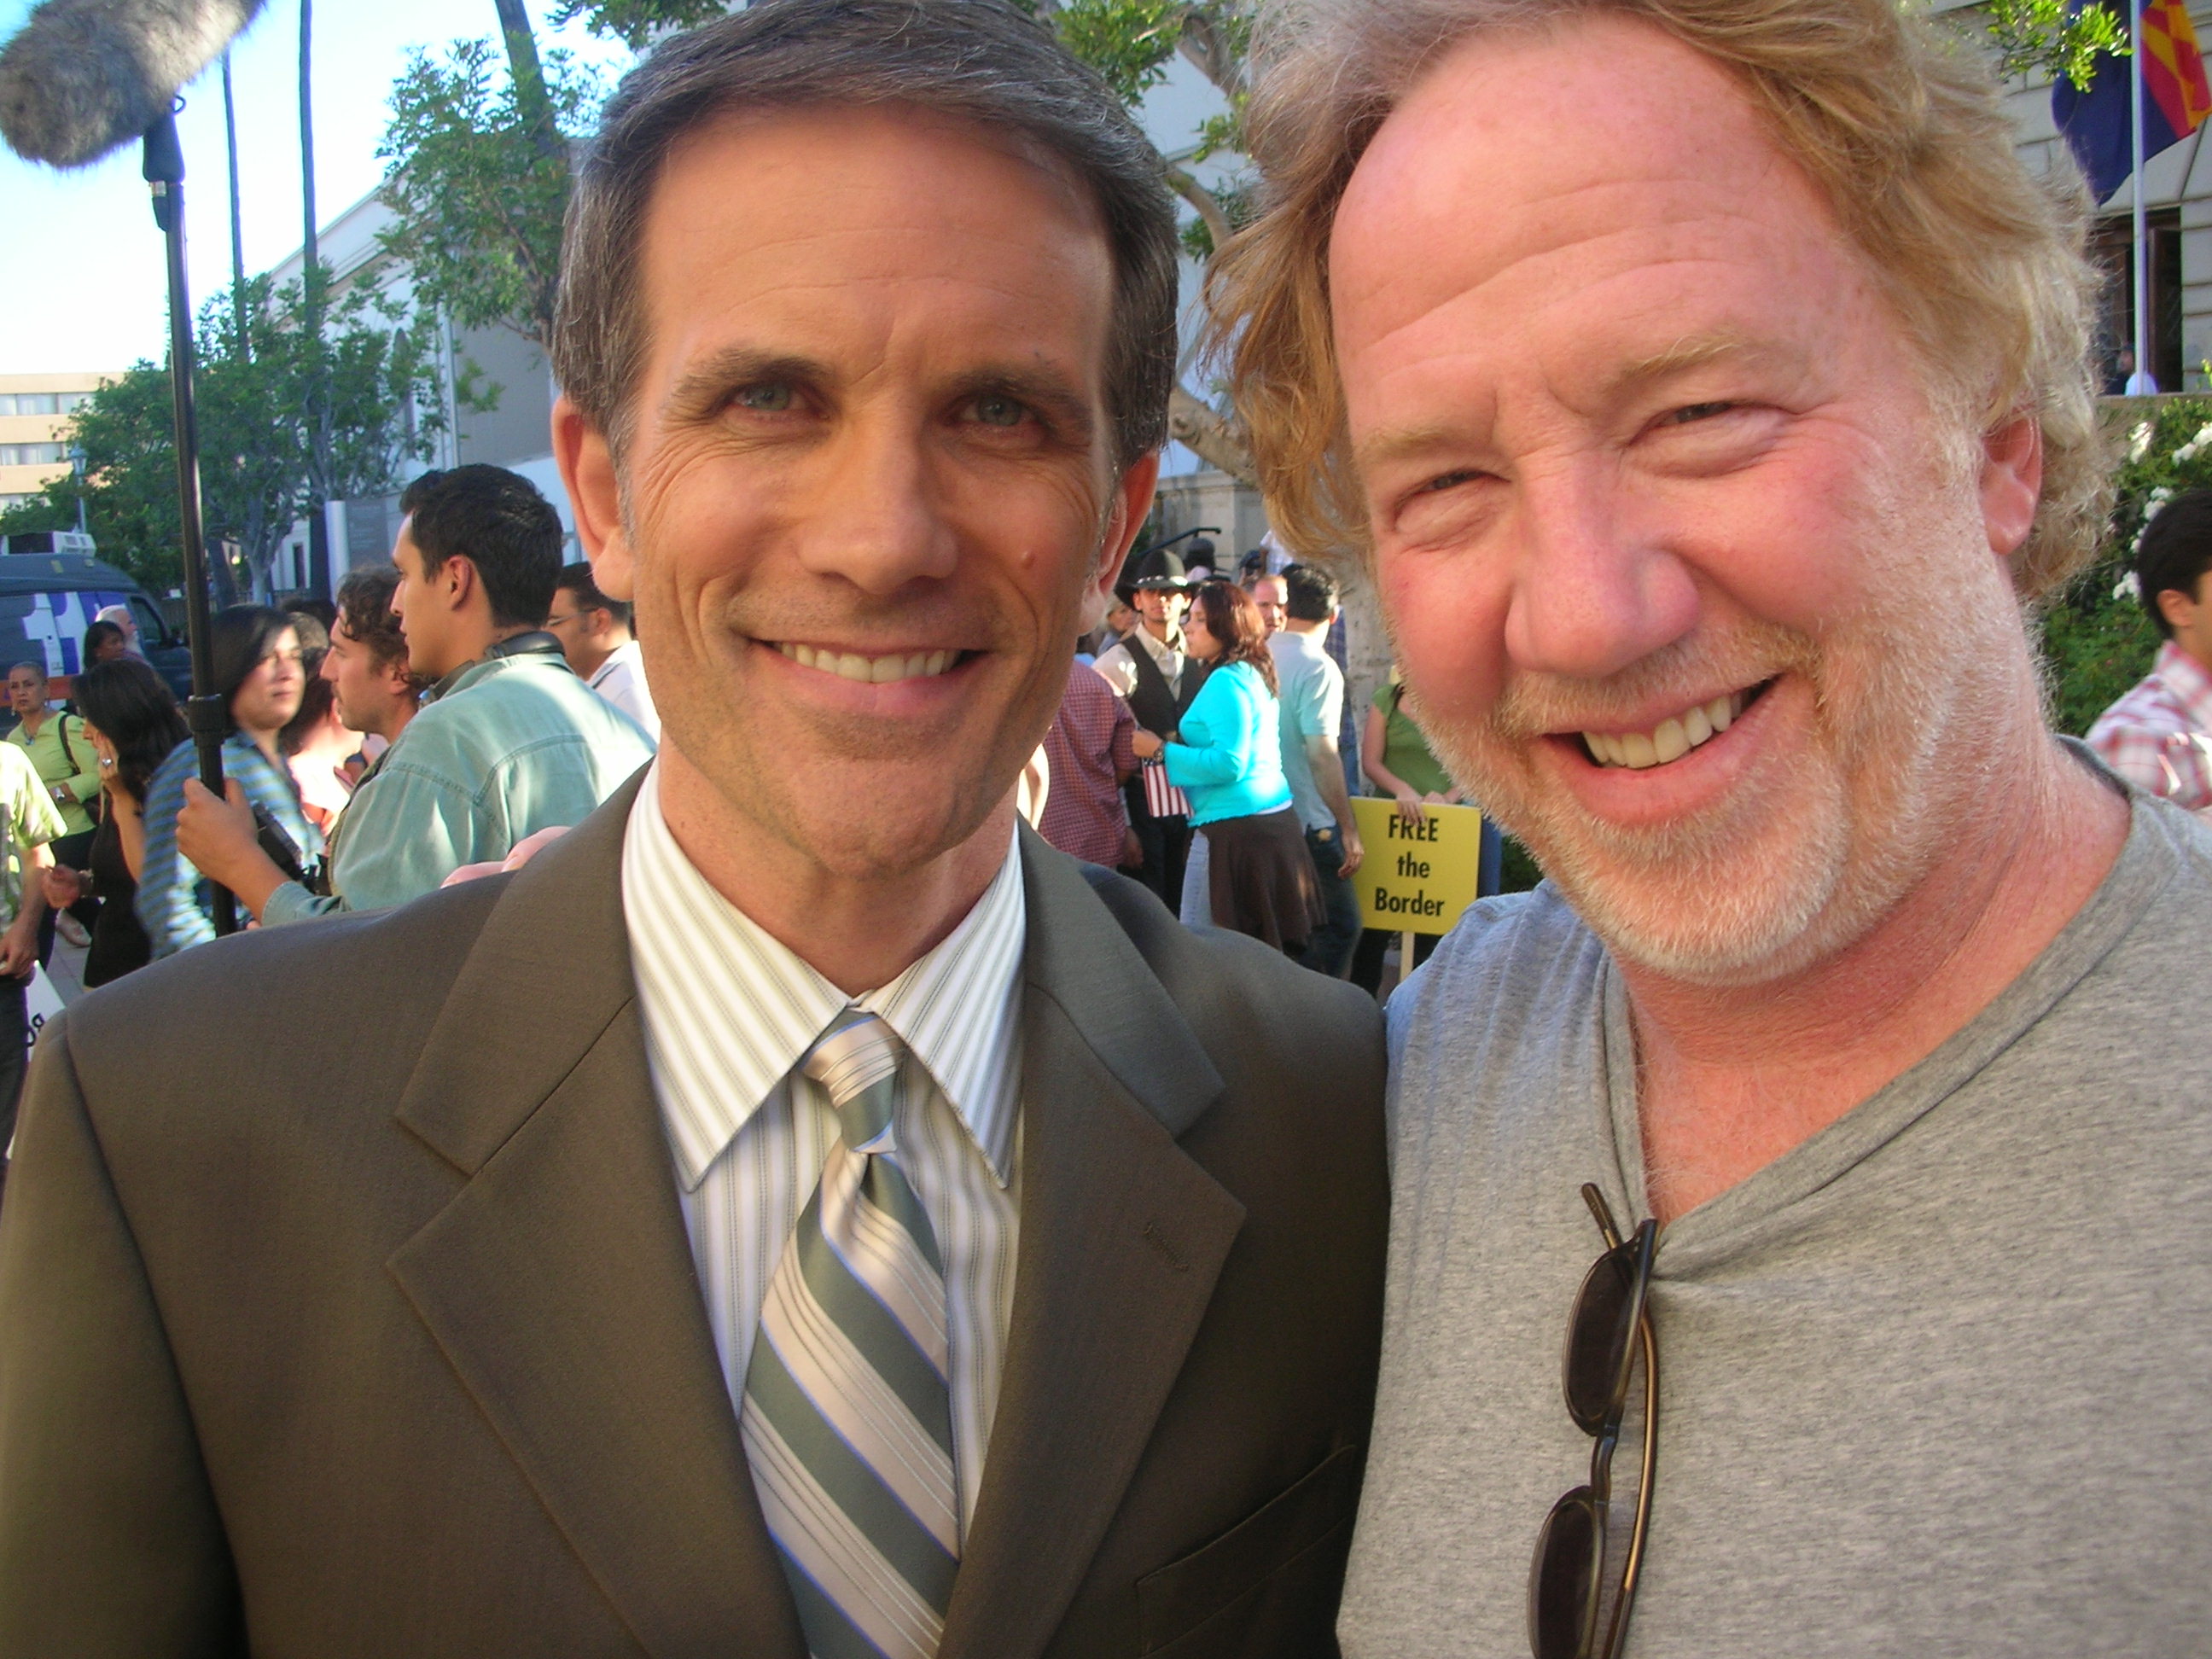 Mel Fair and Timothy Busfield on the set of Outlaw, episode 